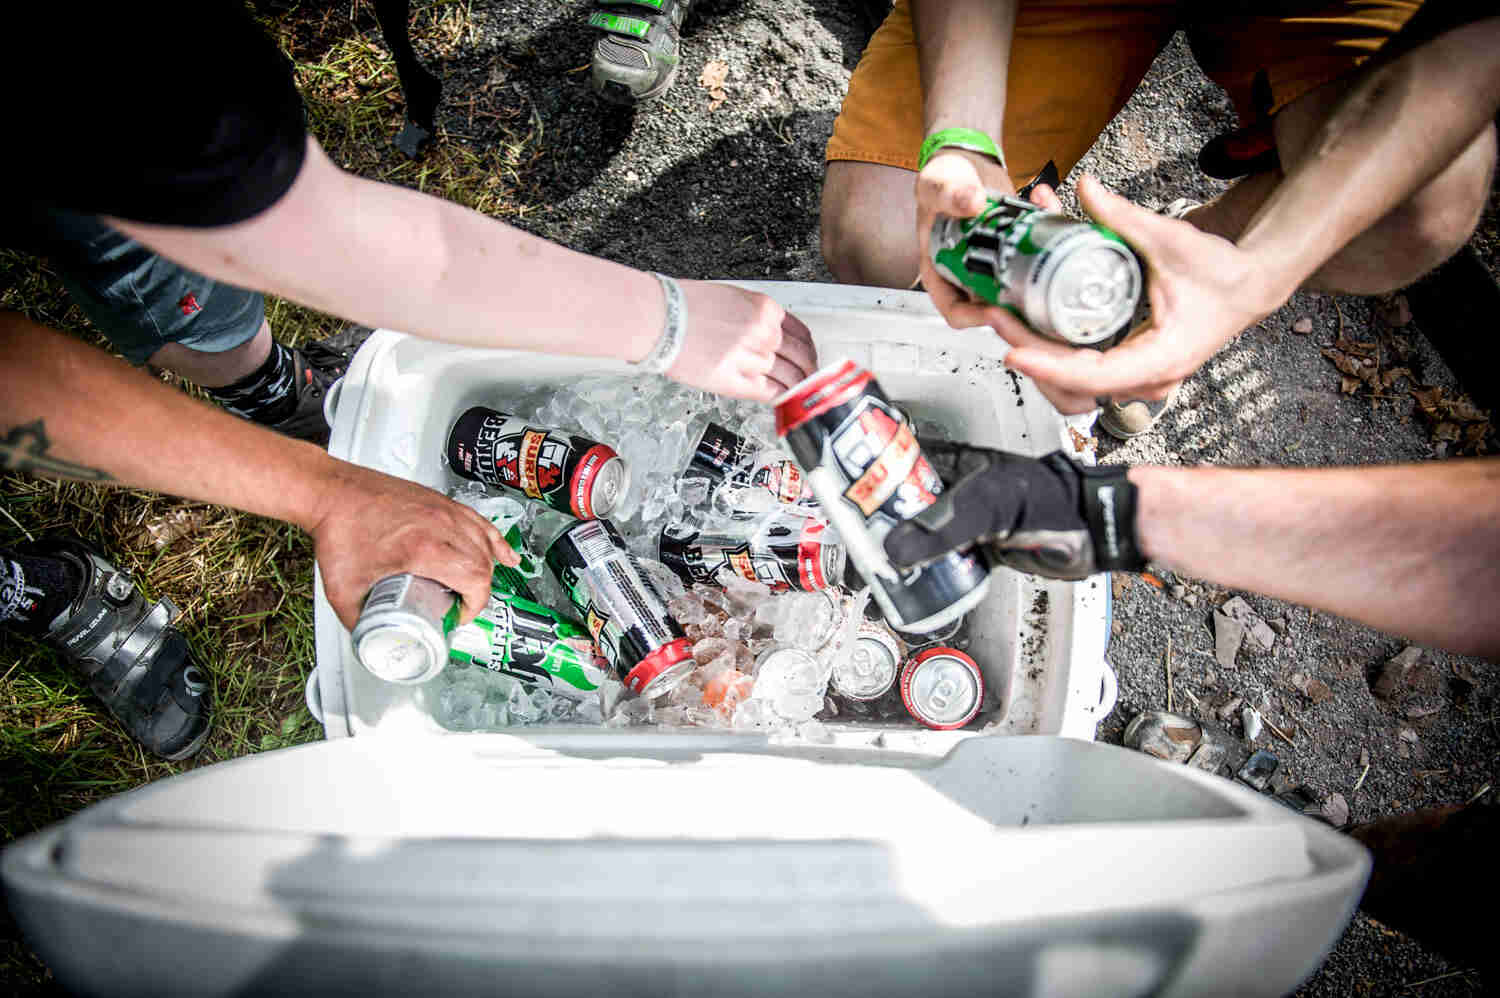 Downward view of hands reaching into cooler of beer cans and ice